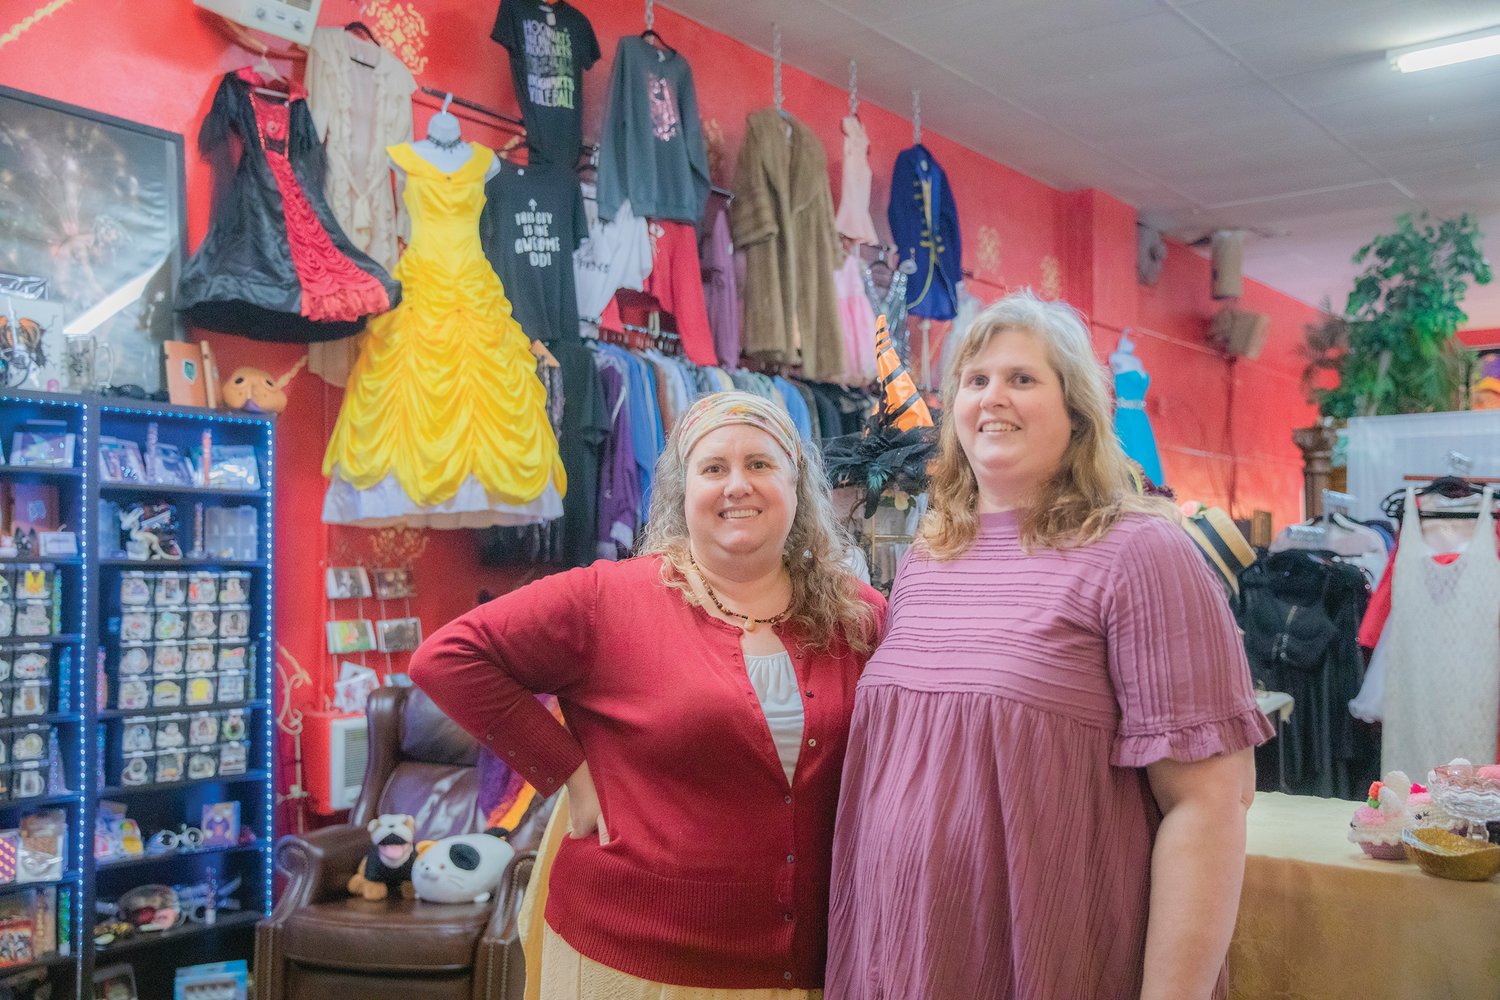 Christy Lakin and Lisa Smith smile for a photo inside The Victorian Showcase and Steampunk Emporium in downtown Centralia on Friday.